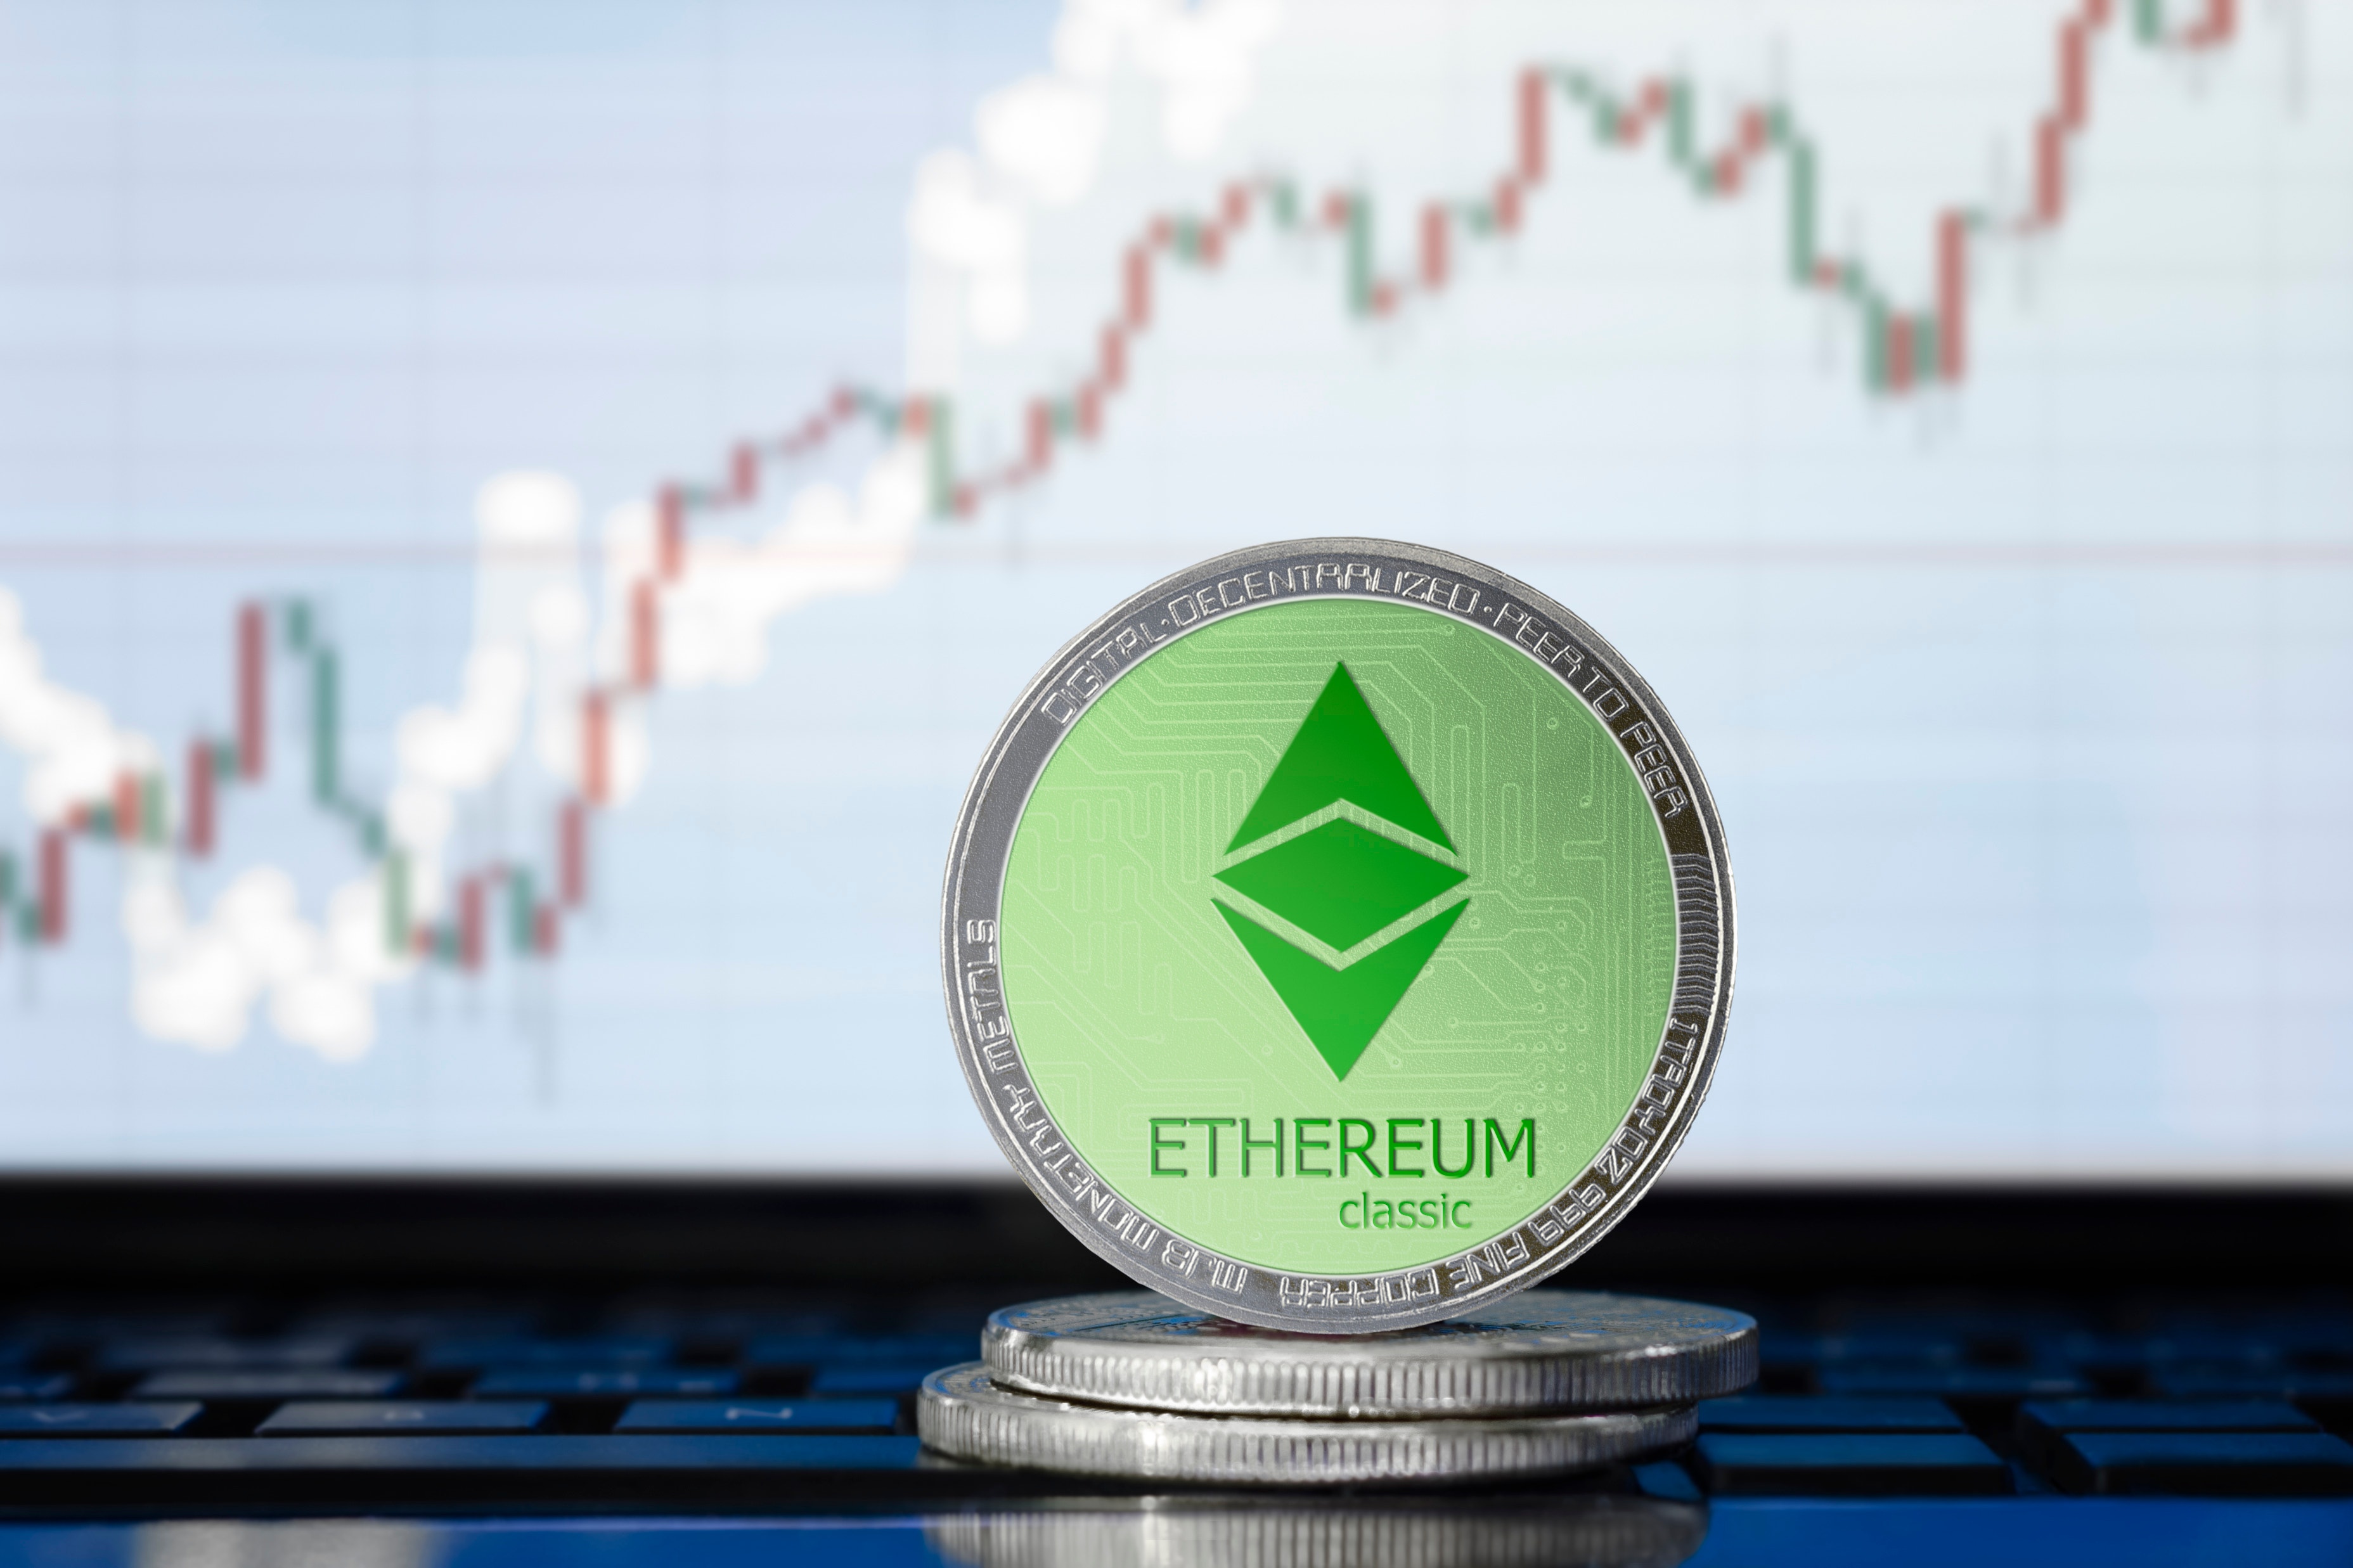 Ethereum Classic (ETC) Shoots Up 26% To Emerge As Day's Top Gainer Ahead Of Bitcoin, Ethereum, Dogecoin: Here's Why